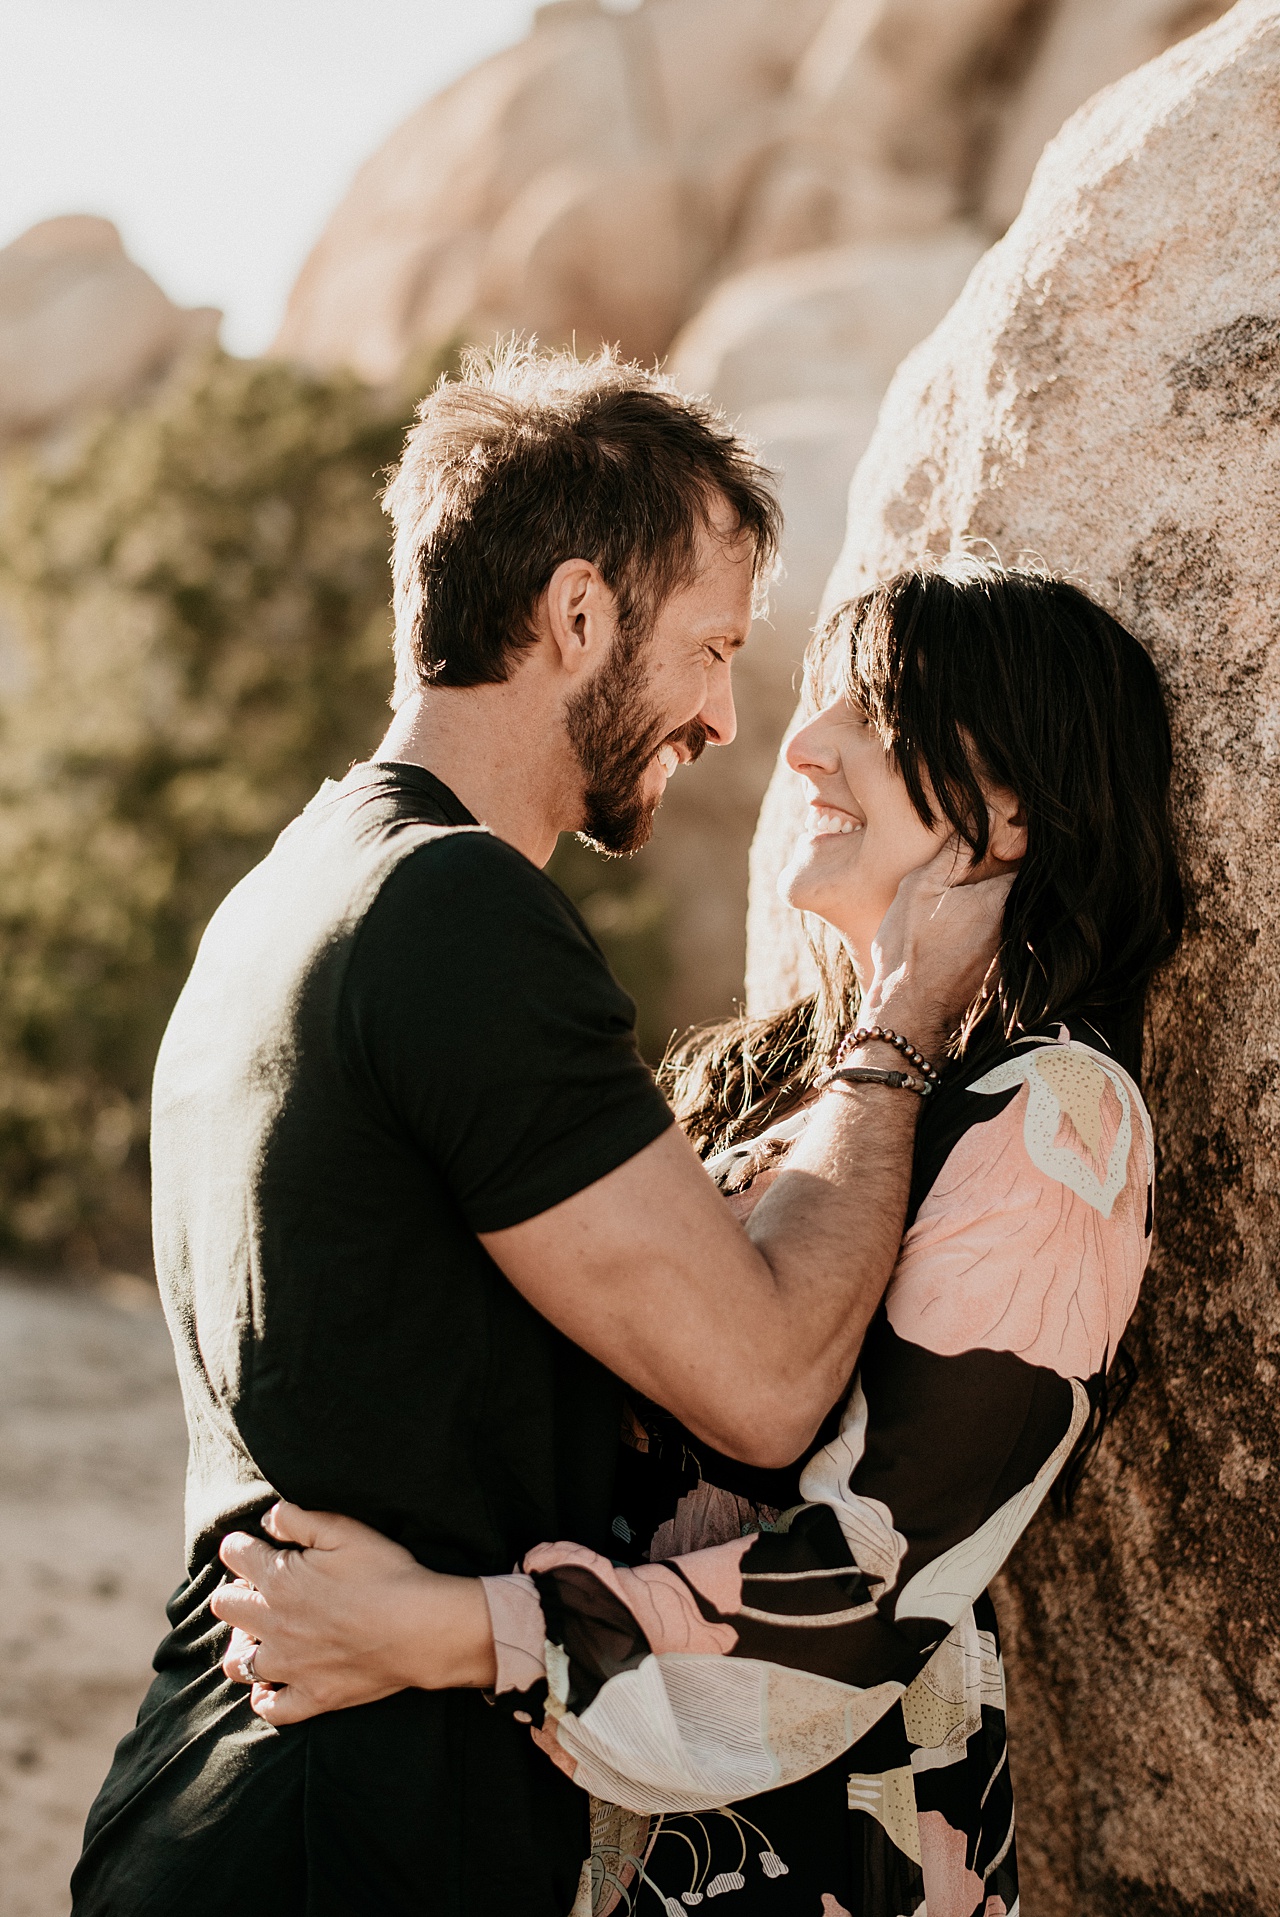 Our Ten Year Anniversary Session in Joshua Tree